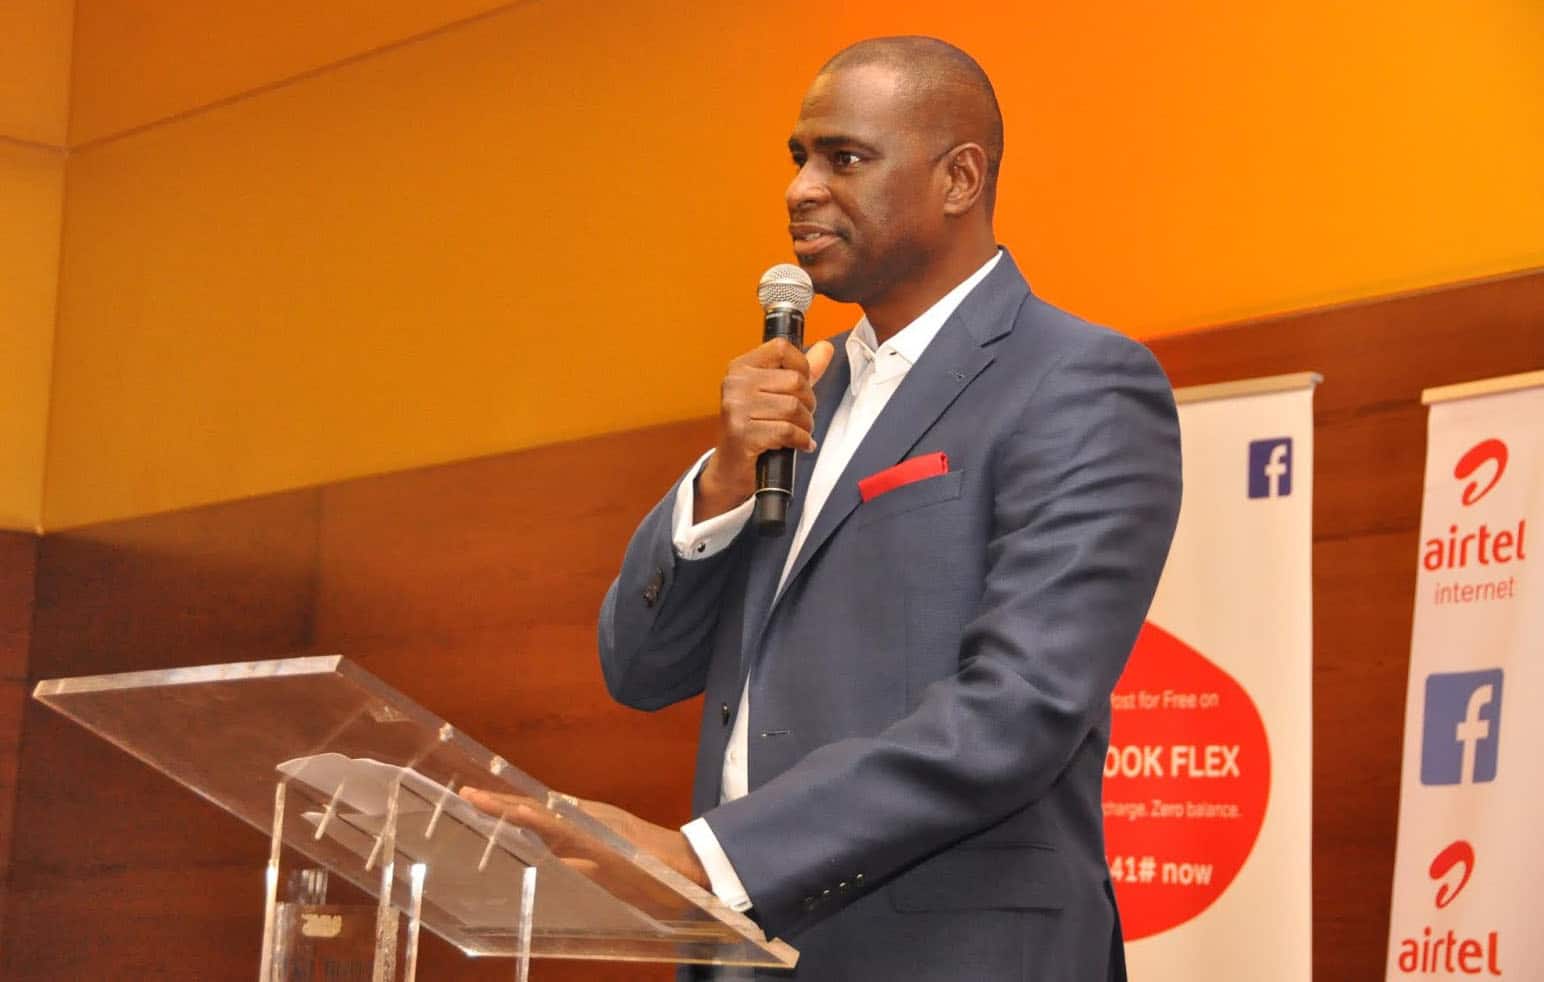 Nxtra project will make Nigeria hub for digital services—Airtel